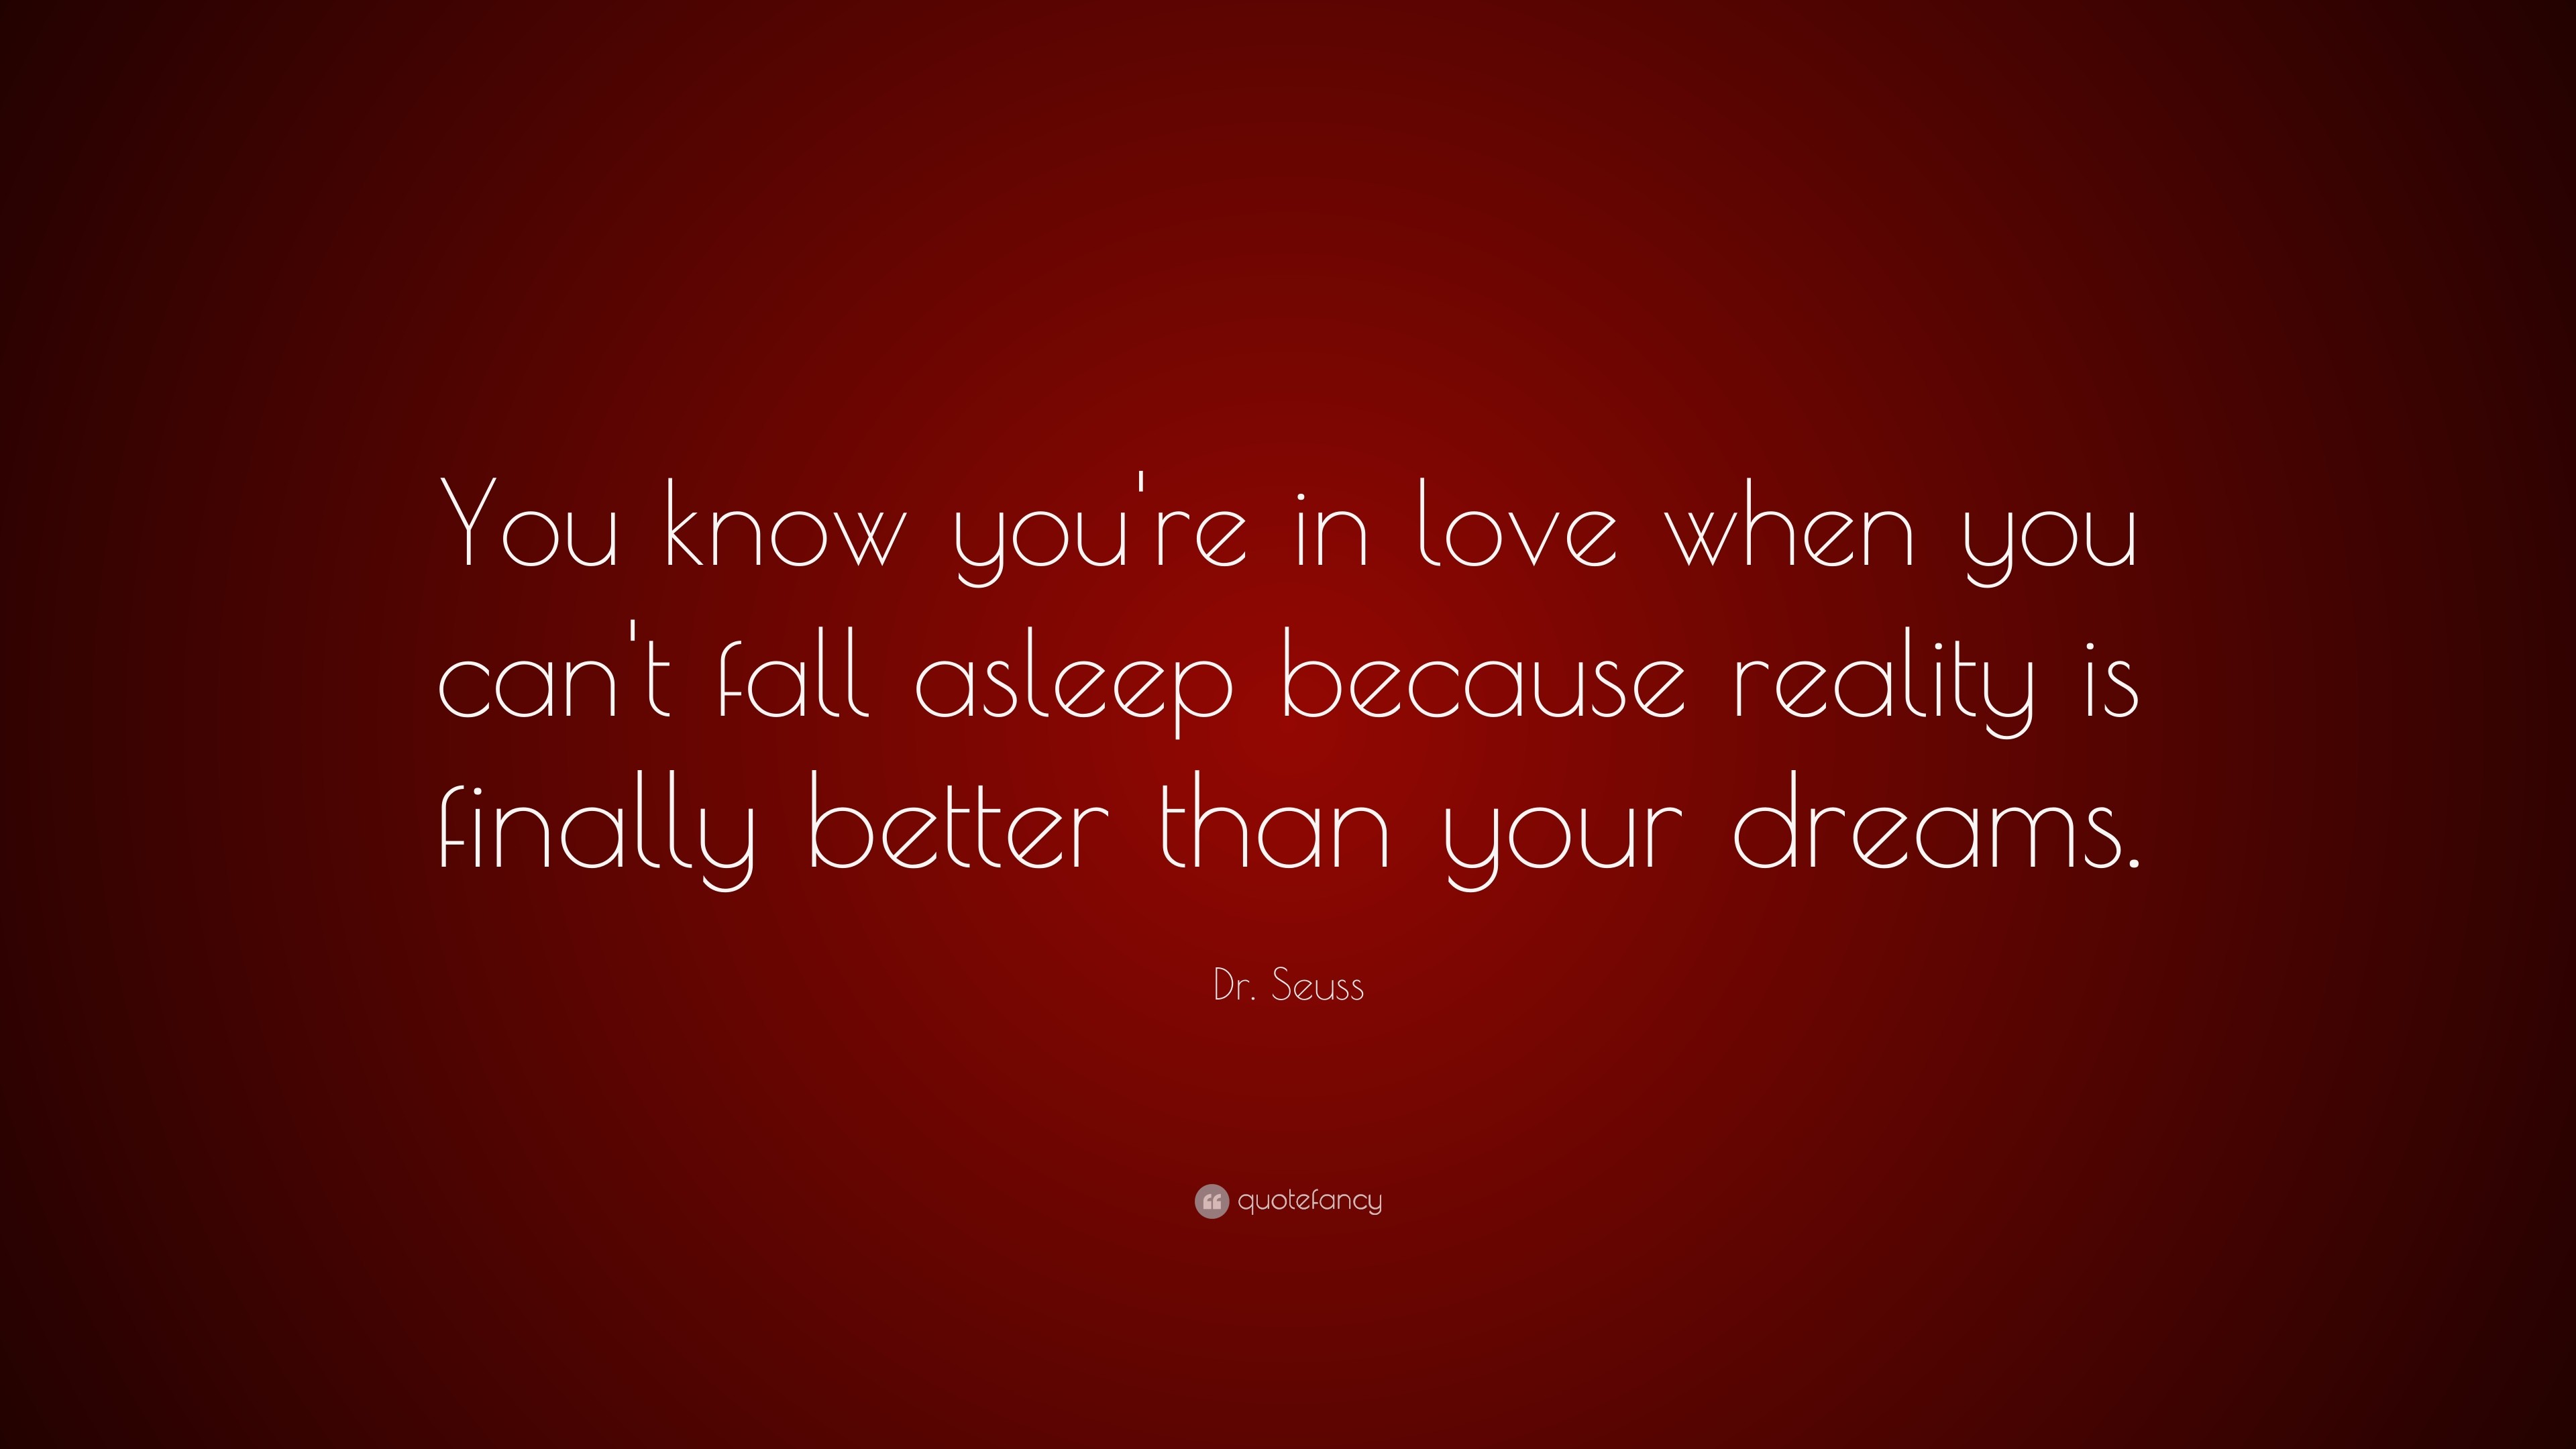 3840x2160 Dr. Seuss Quote: “You know you're in love when you can